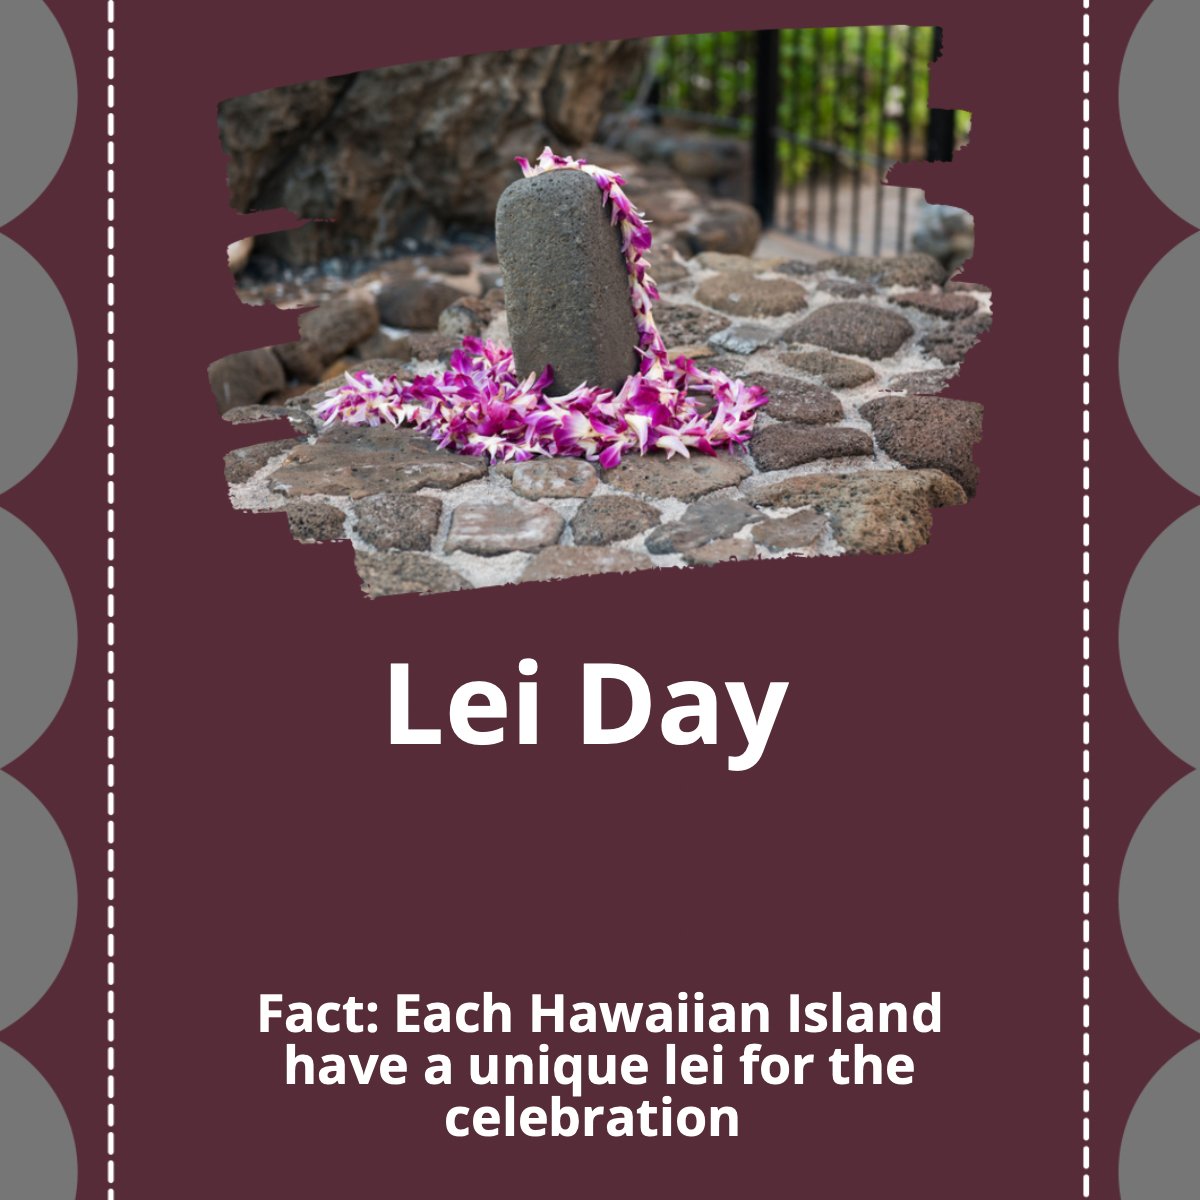 Happy Lei Day to all who celebrate 🙌!

Did you know? 🤔  Each Hawaiian island has a unique lei for the celebration. 😱

#lei #day #hawaii #flowers #celebration #grey
 #mitakapadia #realestate #realestateagent #remax #homebuying #homeselling #sanfranciscobayarea